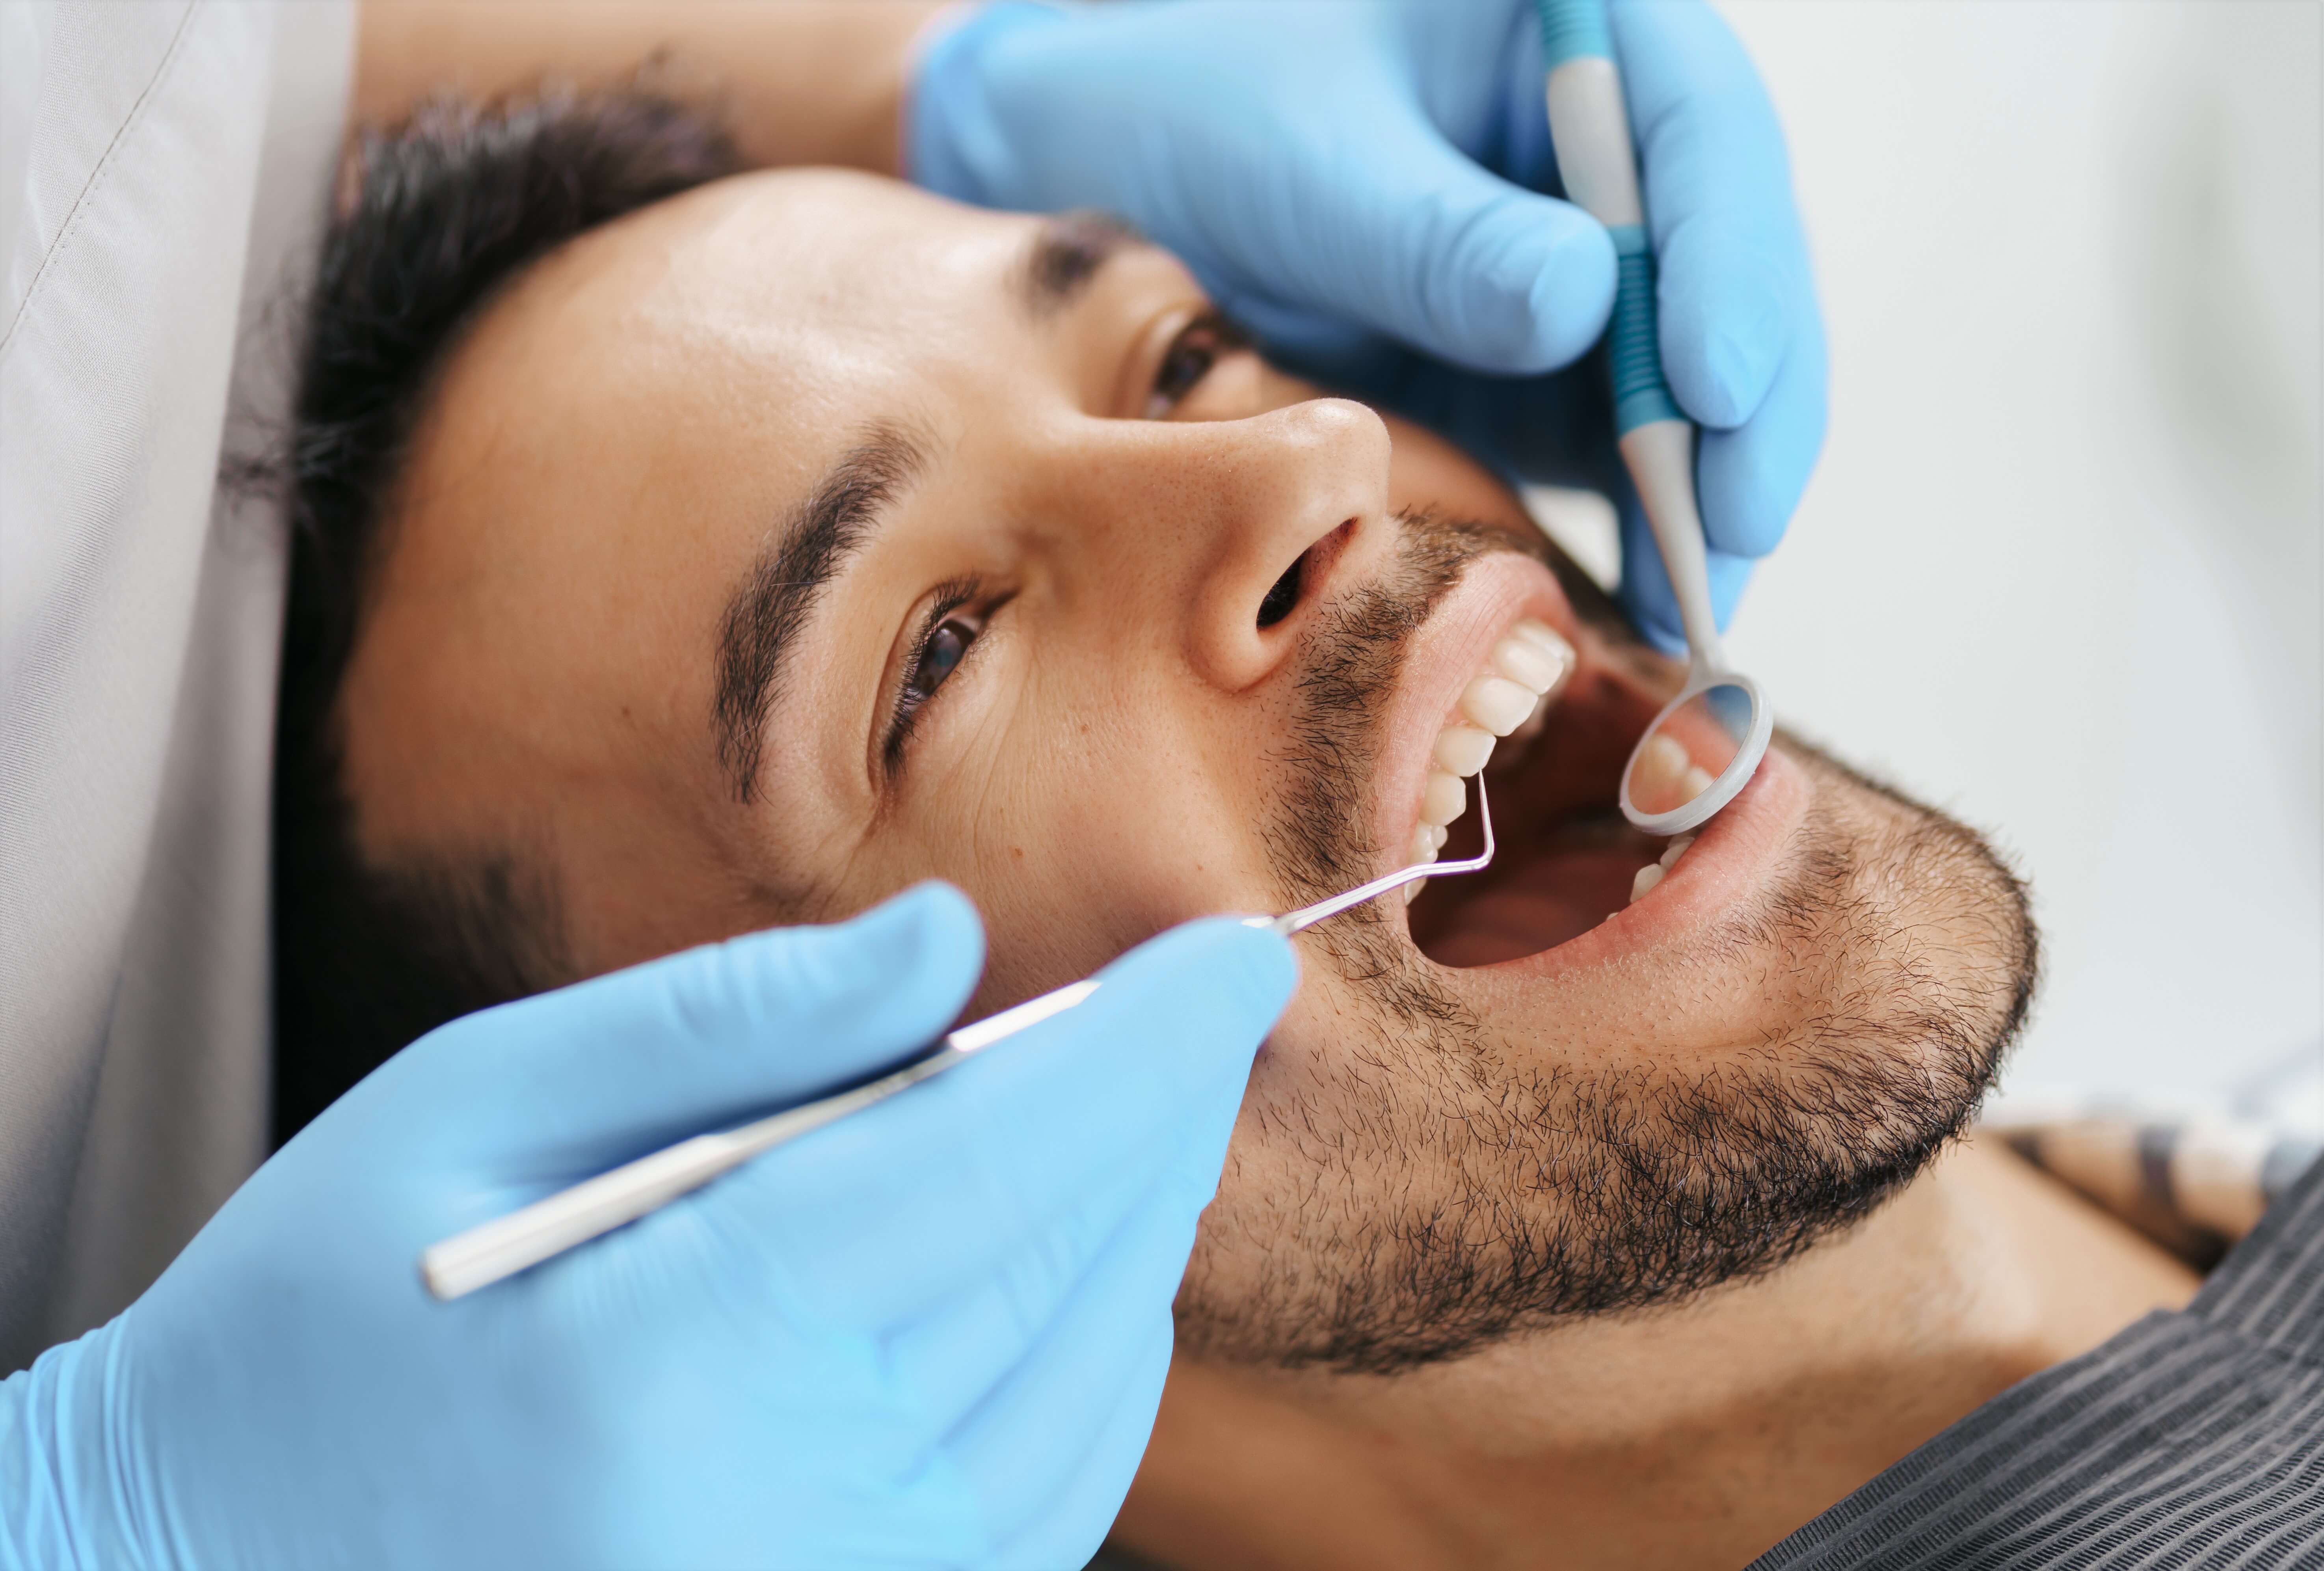 A dental professional performing gum surgery on a patient's mouth